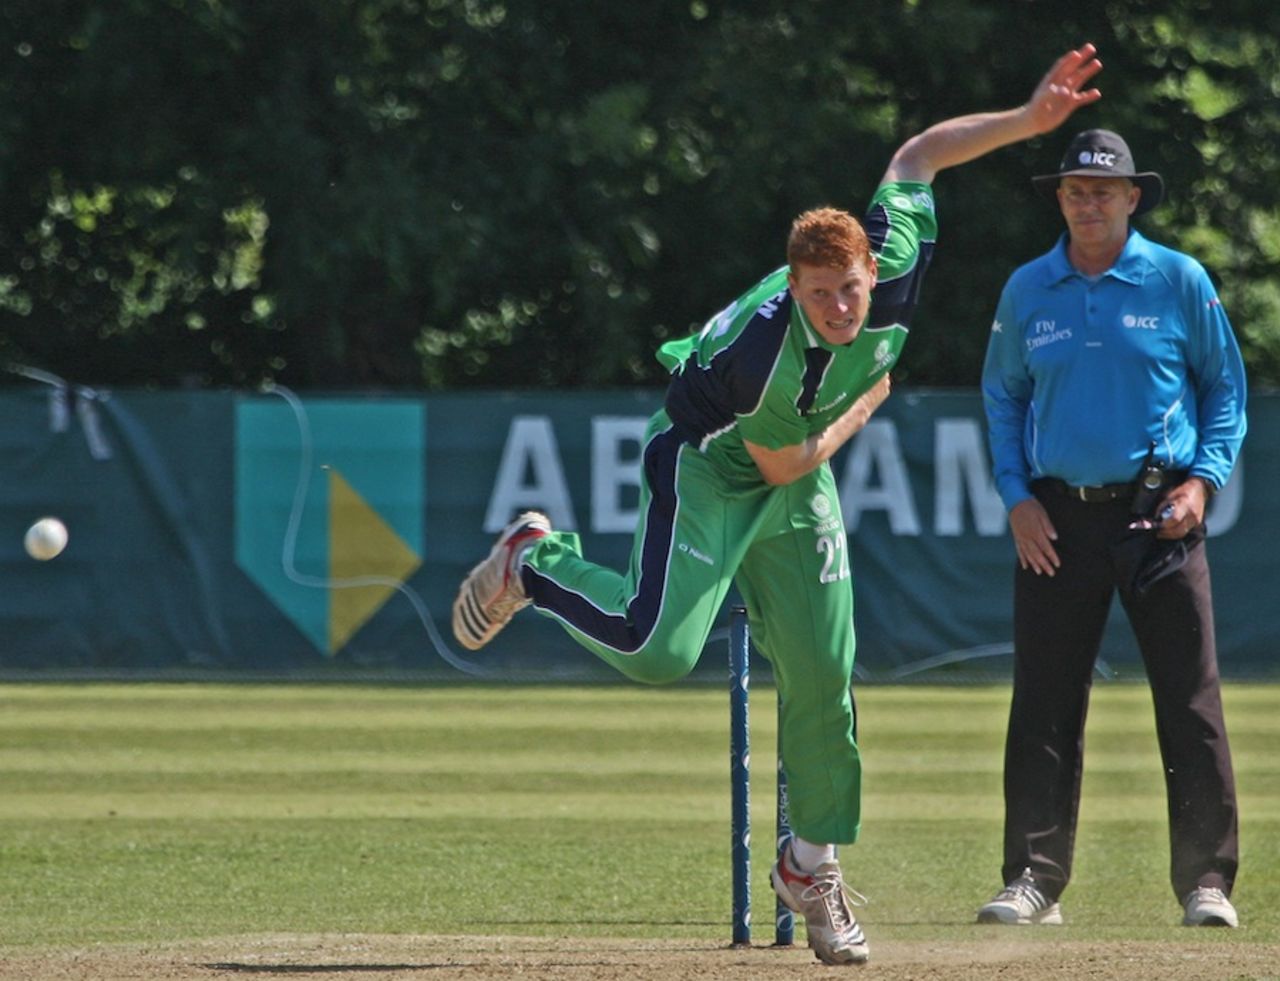 Kevin O'Brien picked up four wickets, Netherlands v Ireland, WCL, Amstelveen, July 7, 2013